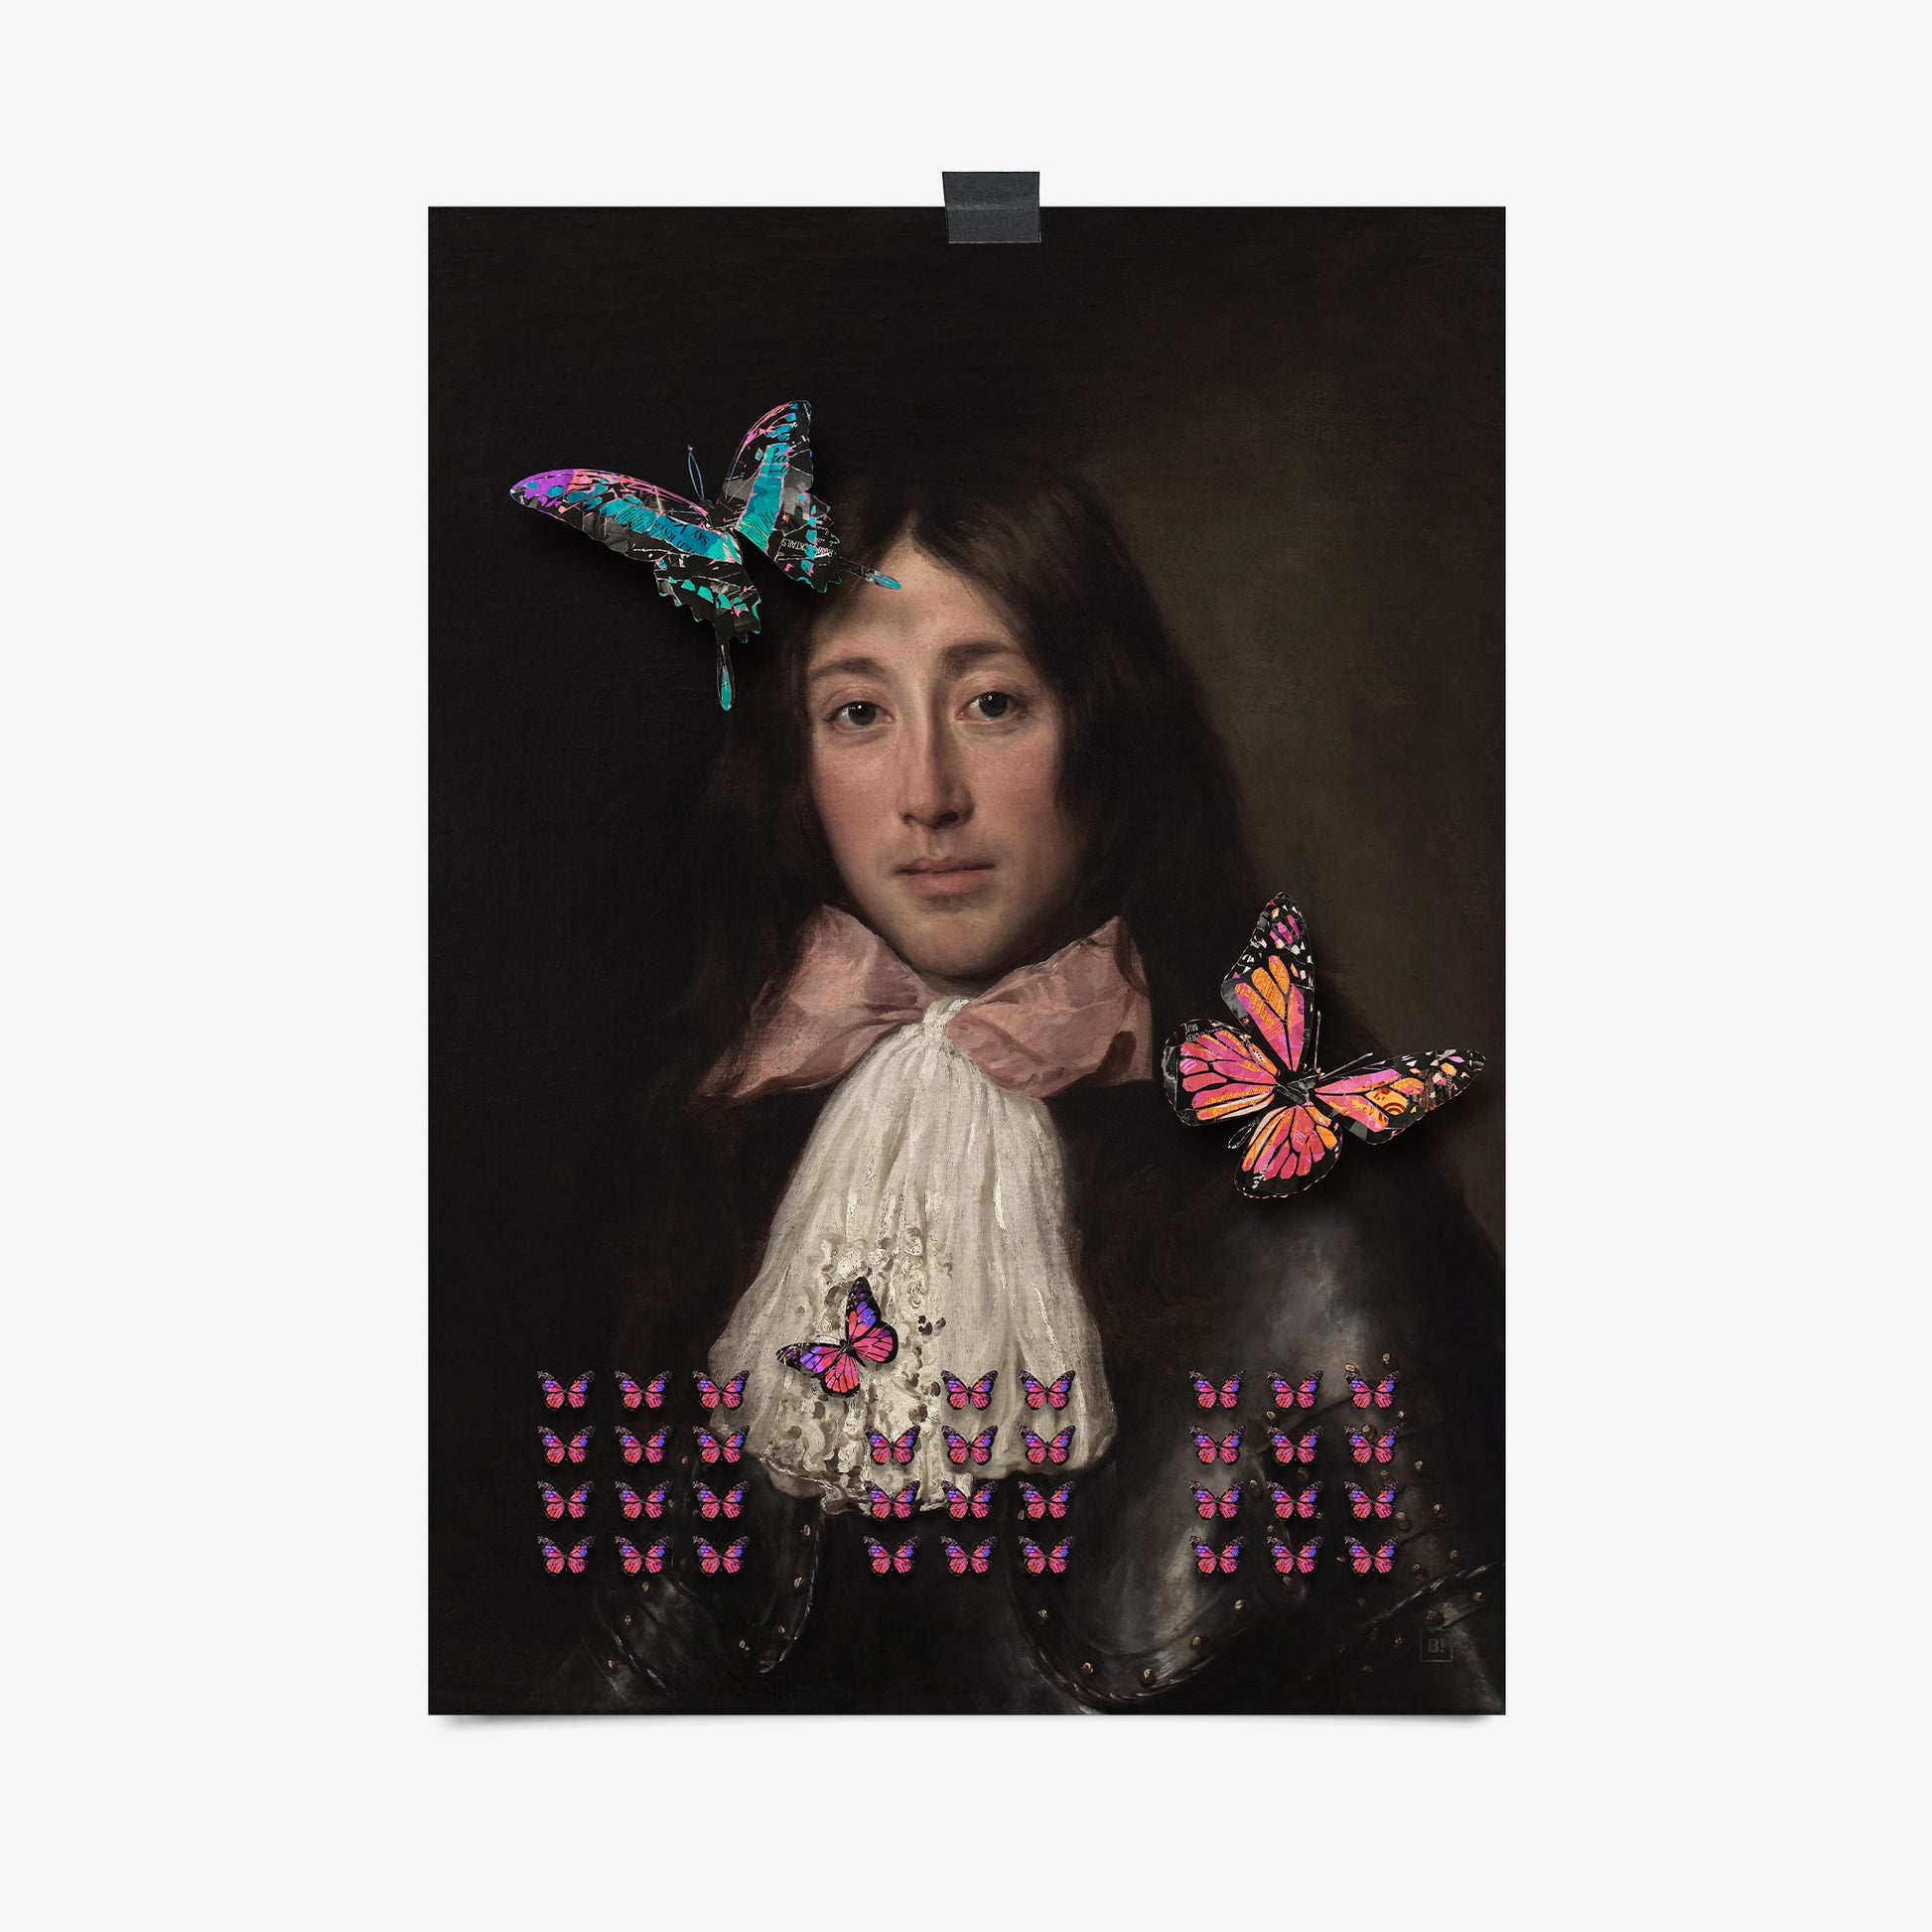 Be inspired by our altered soldier with pink tie and butterflies art print. This artwork was printed using the giclée process on archival acid-free paper that captures its timeless beauty in every detail.